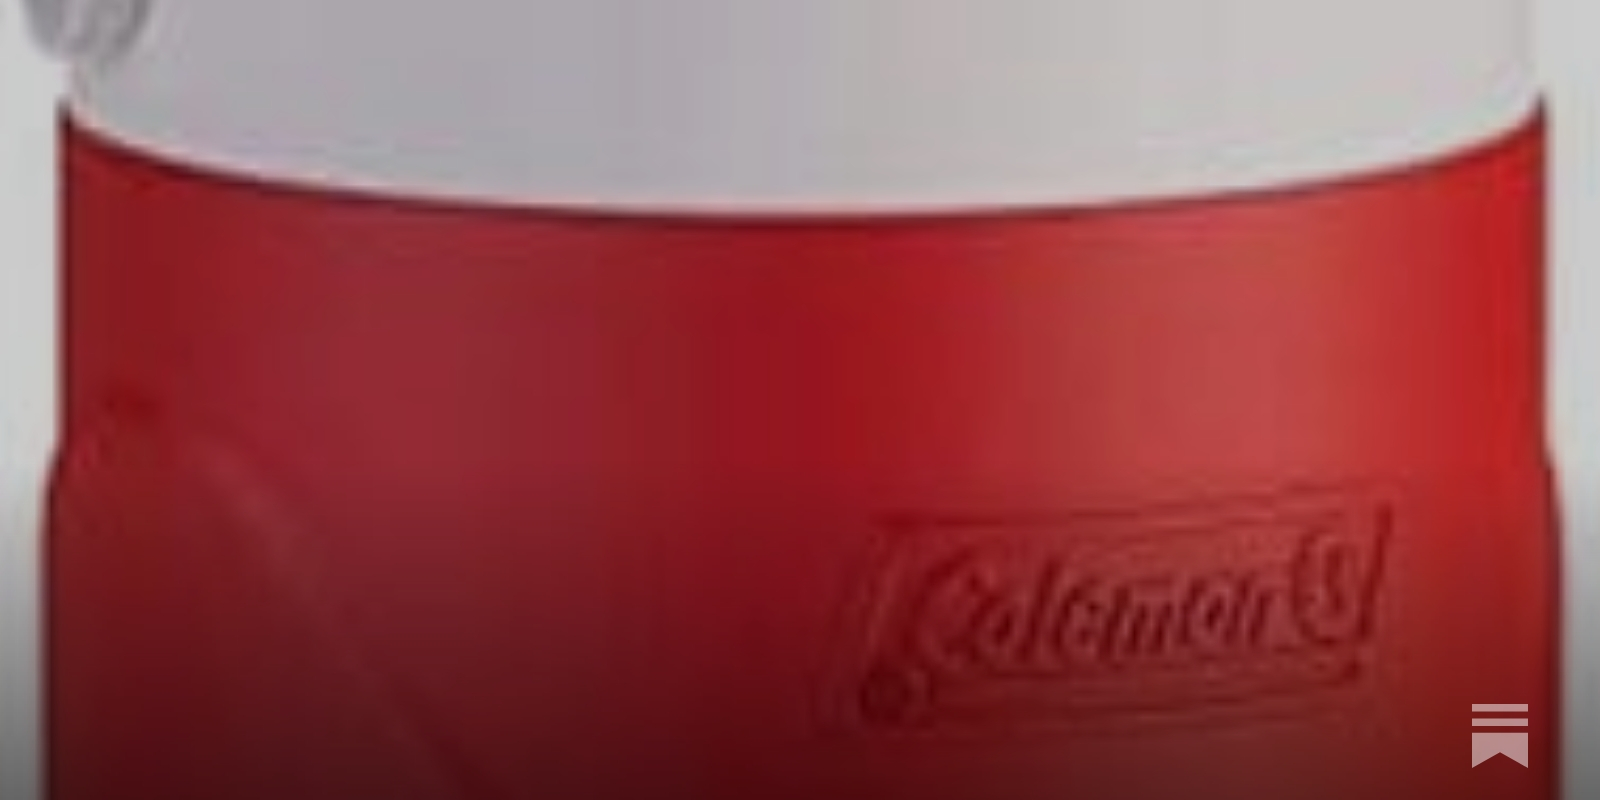 The Red One-Gallon Coleman Water Jug Is Nearly Extinct